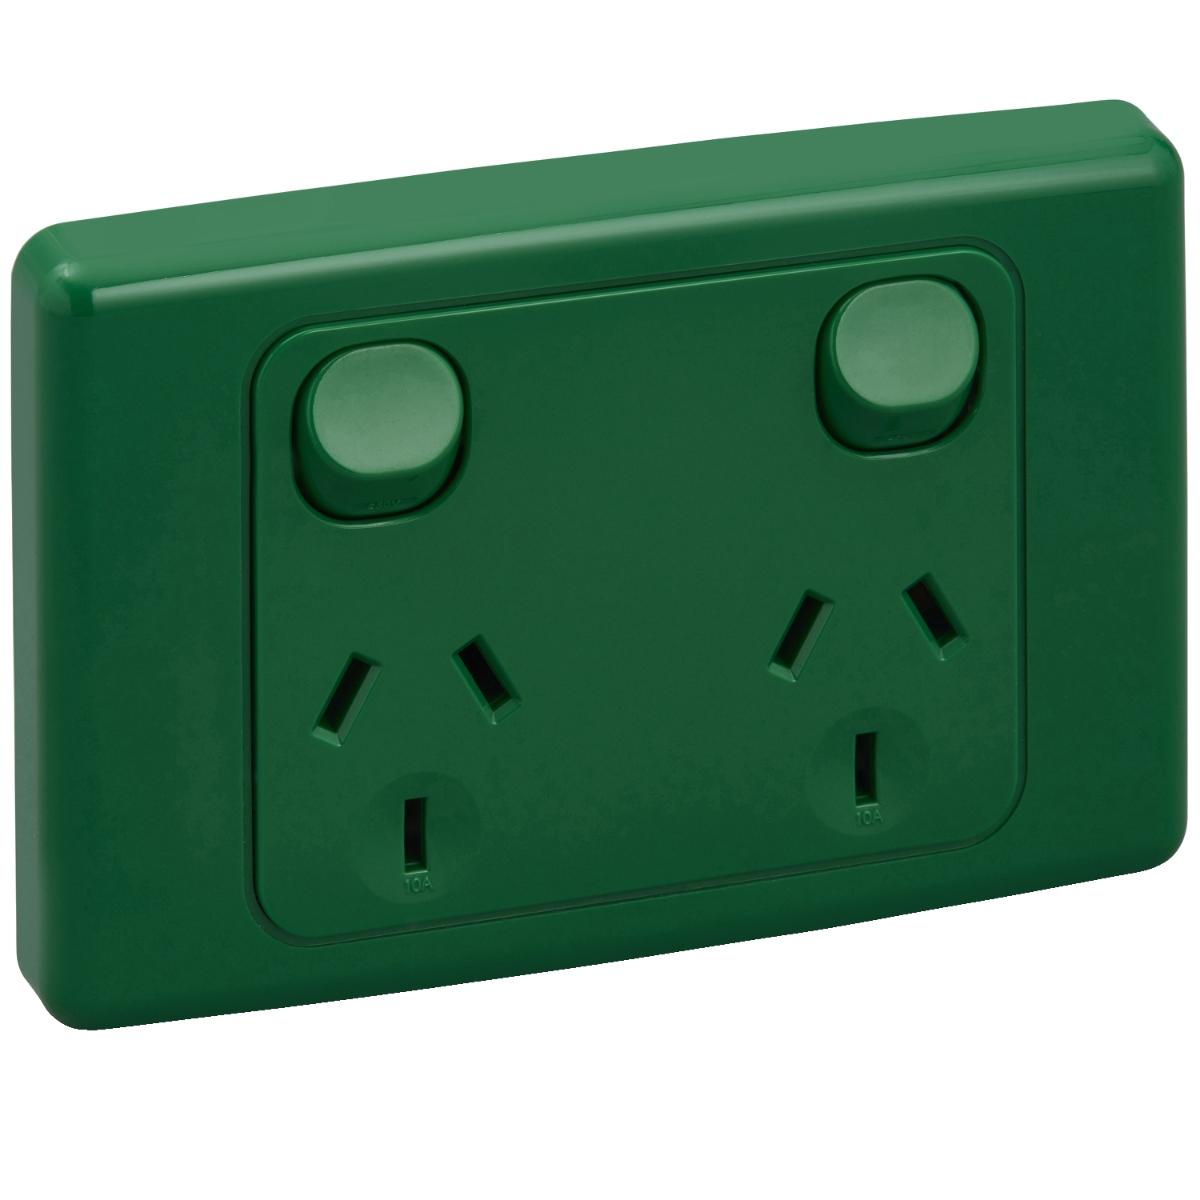 GPO SOCKET SWT TWIN 10A 250V GREEN